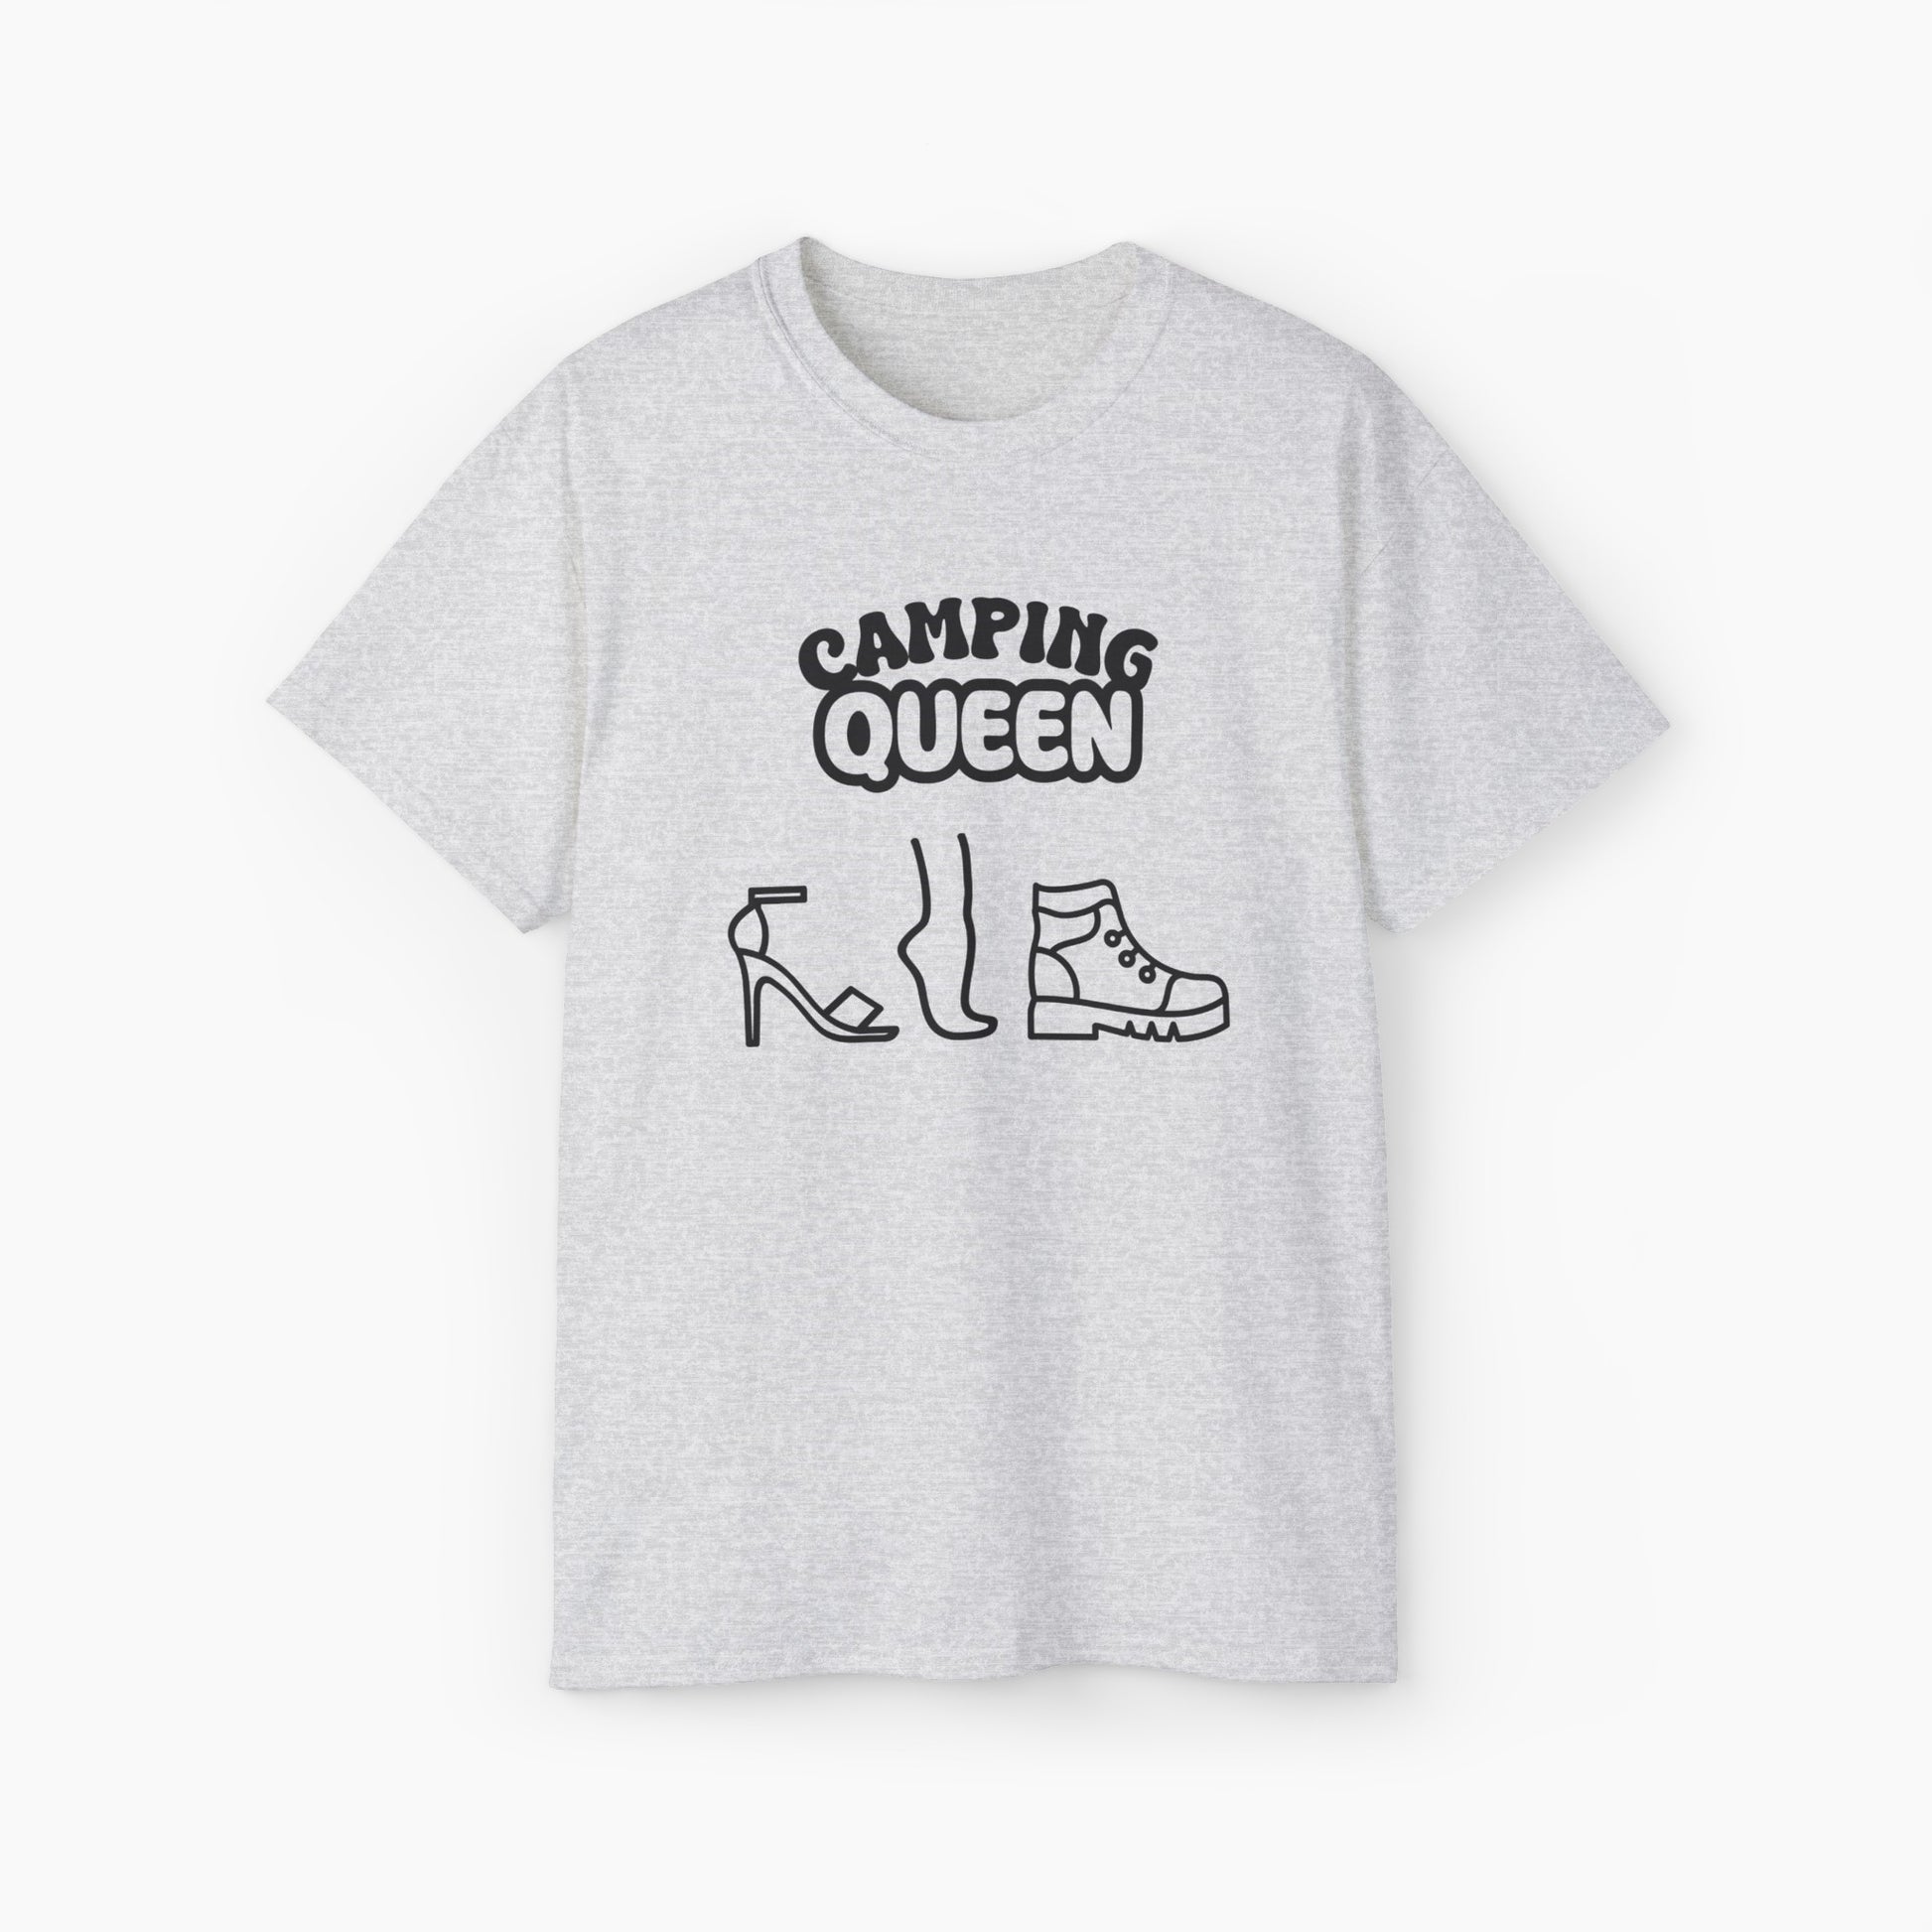 Light grey t-shirt with 'Camping Queen' text, illustrated with a high heel, a foot, and a boot, on a plain background.